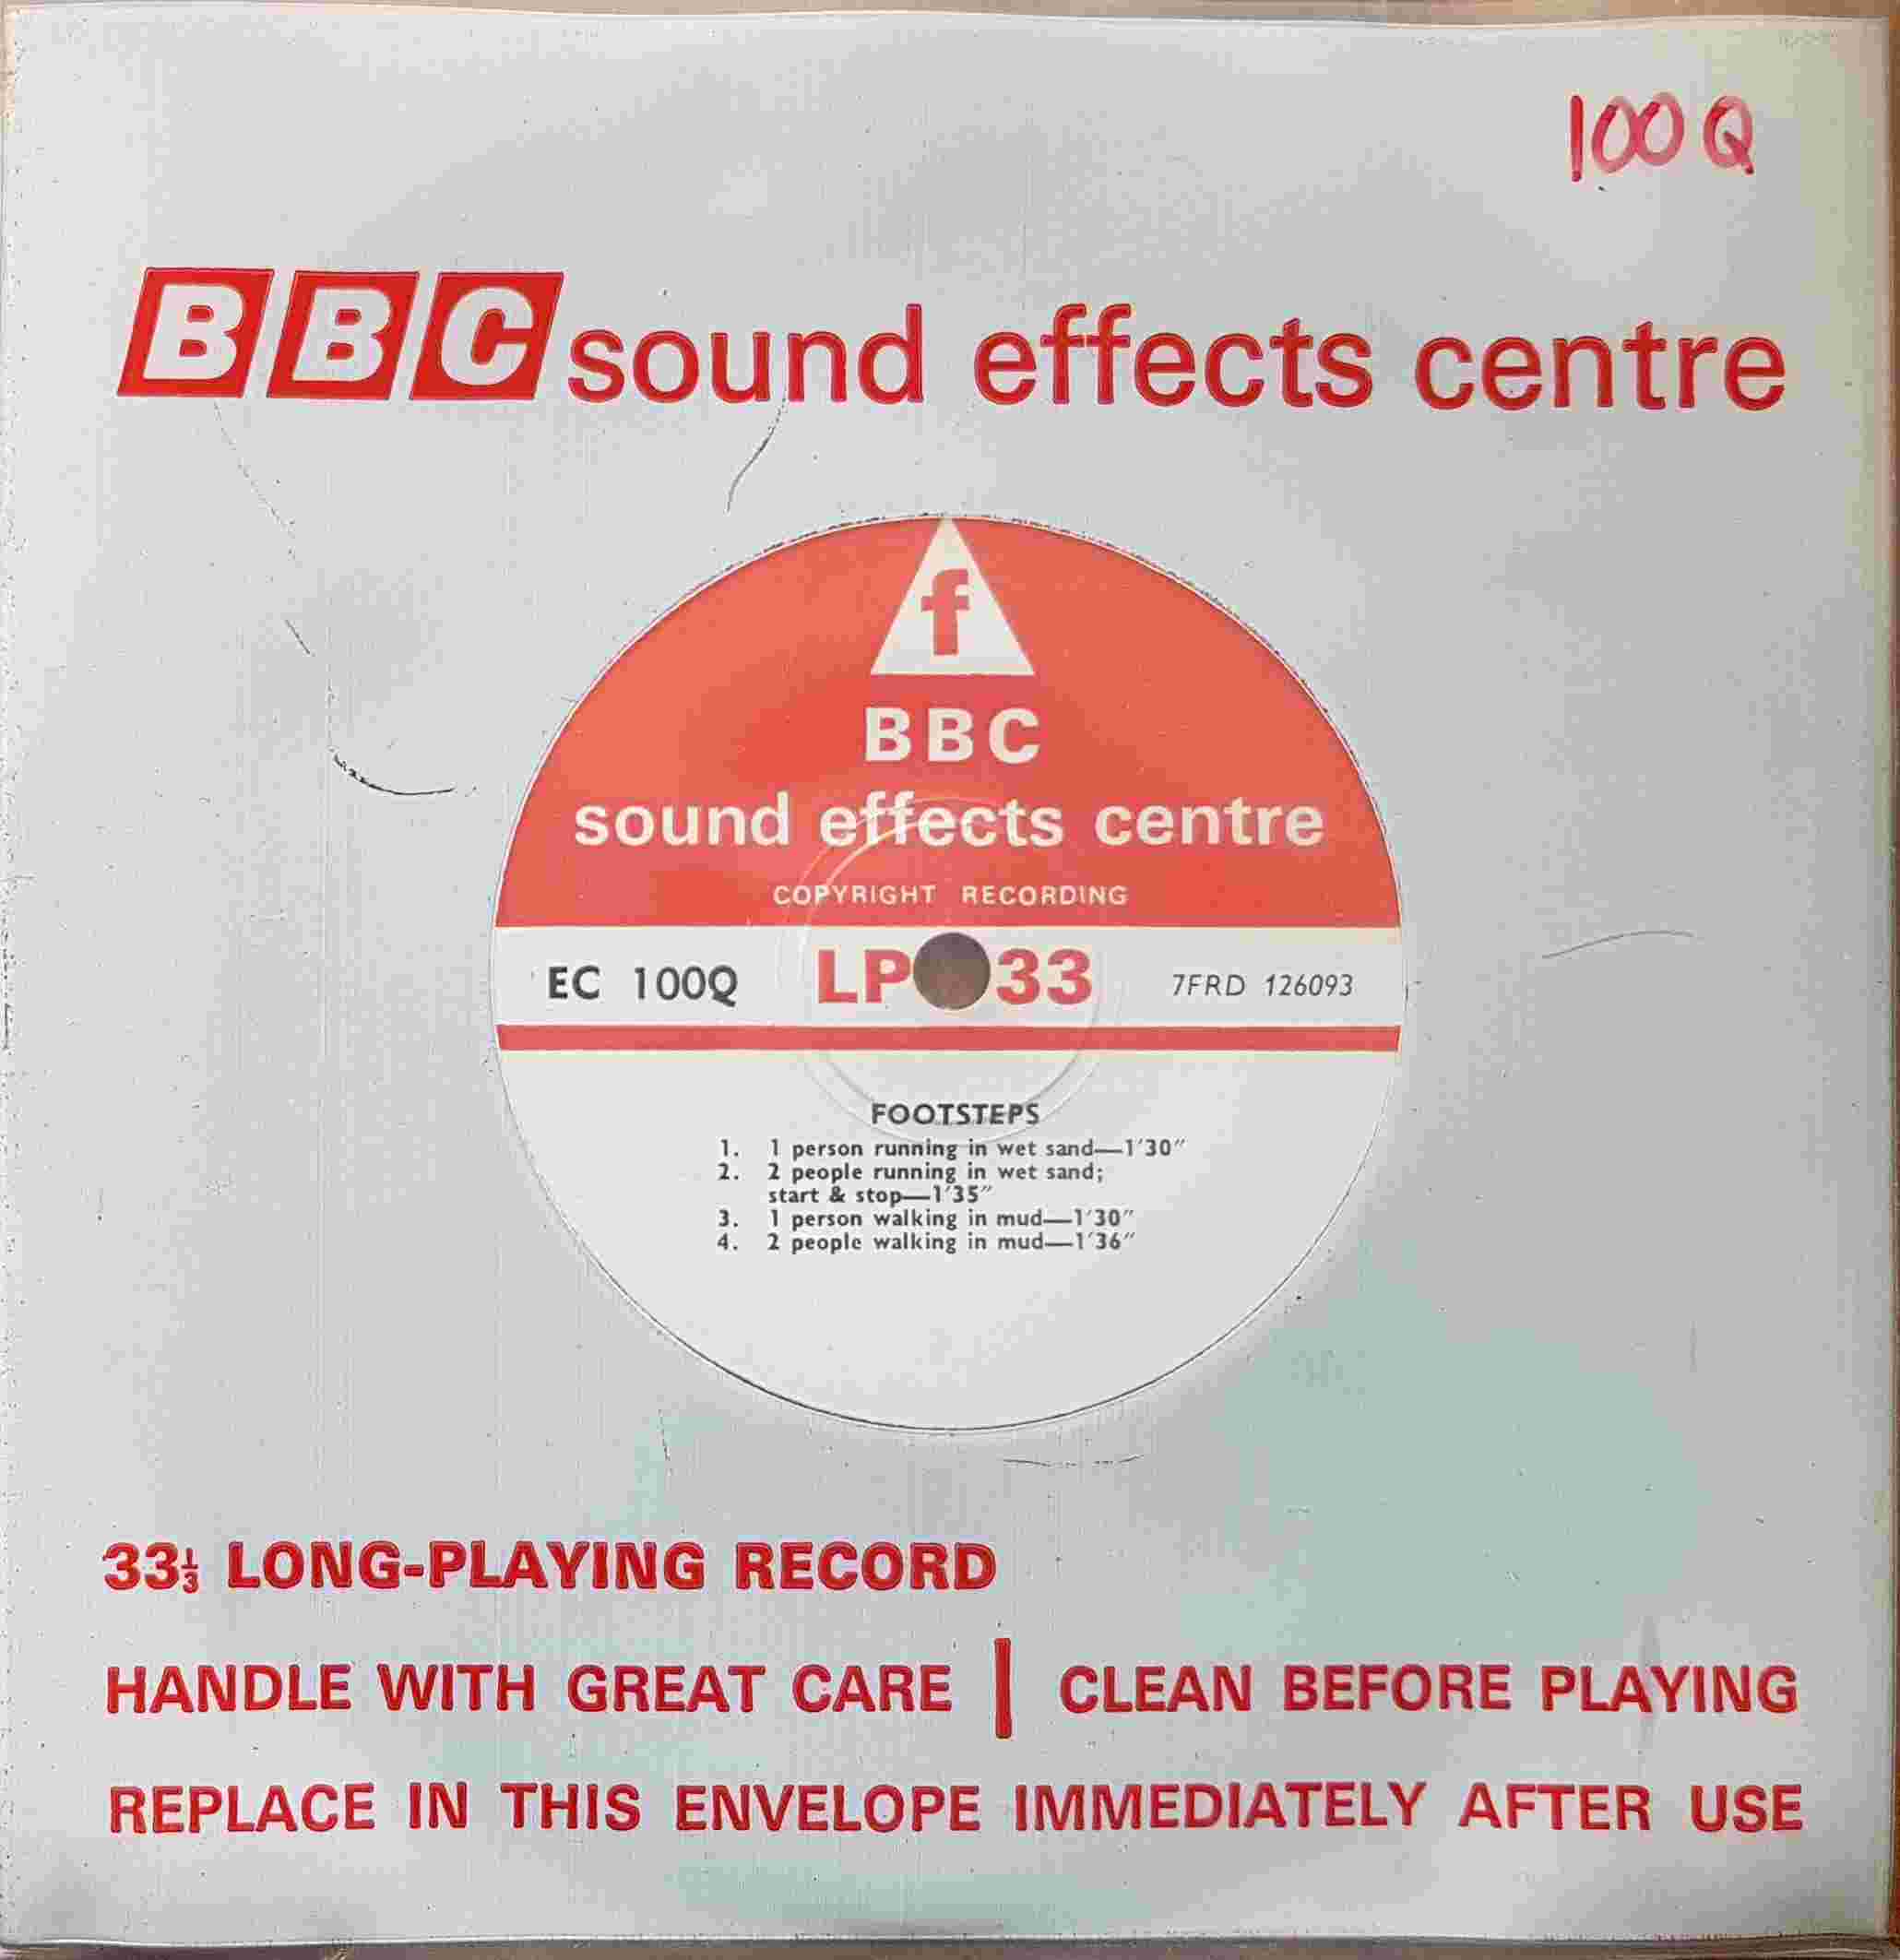 Picture of EC 100Q Footsteps by artist Not registered from the BBC singles - Records and Tapes library